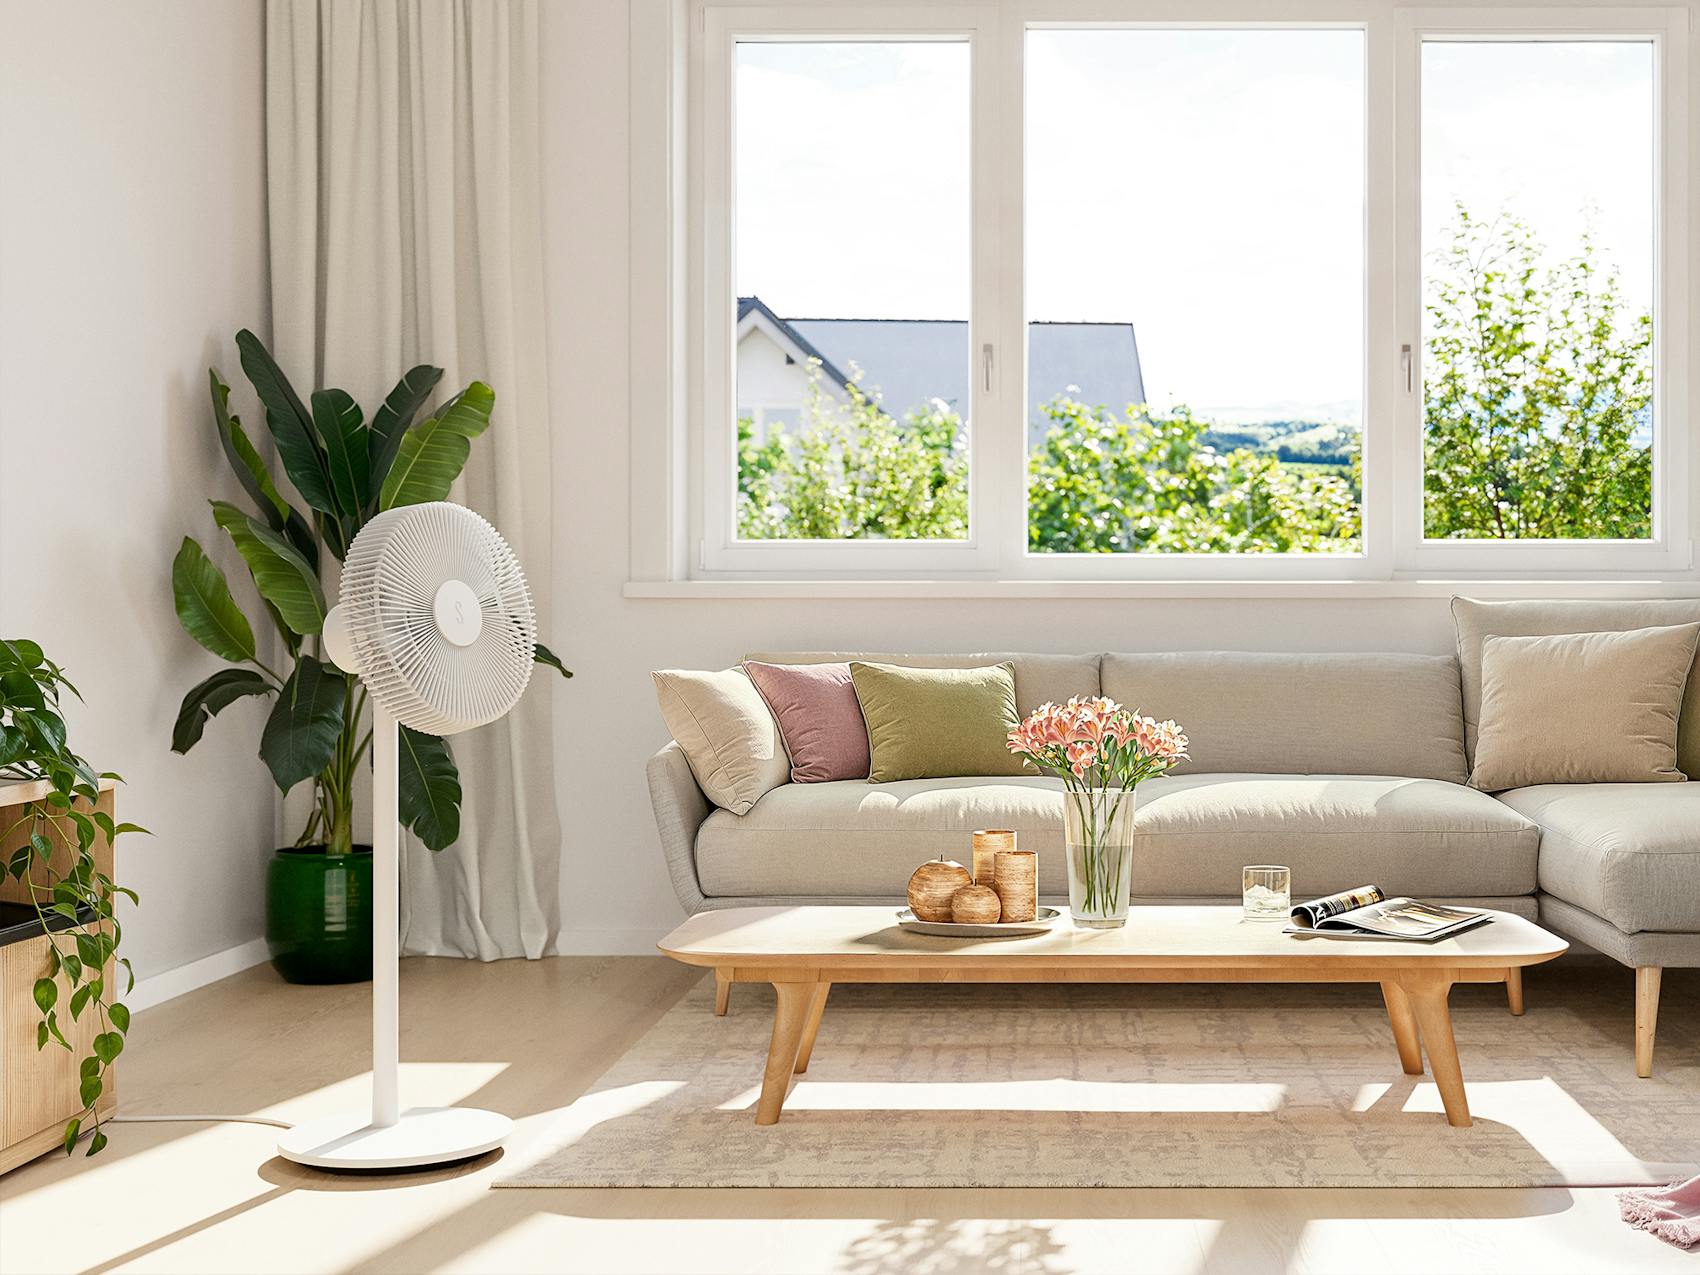 Finn fan by Stadler Form in a modern living room with summery flair